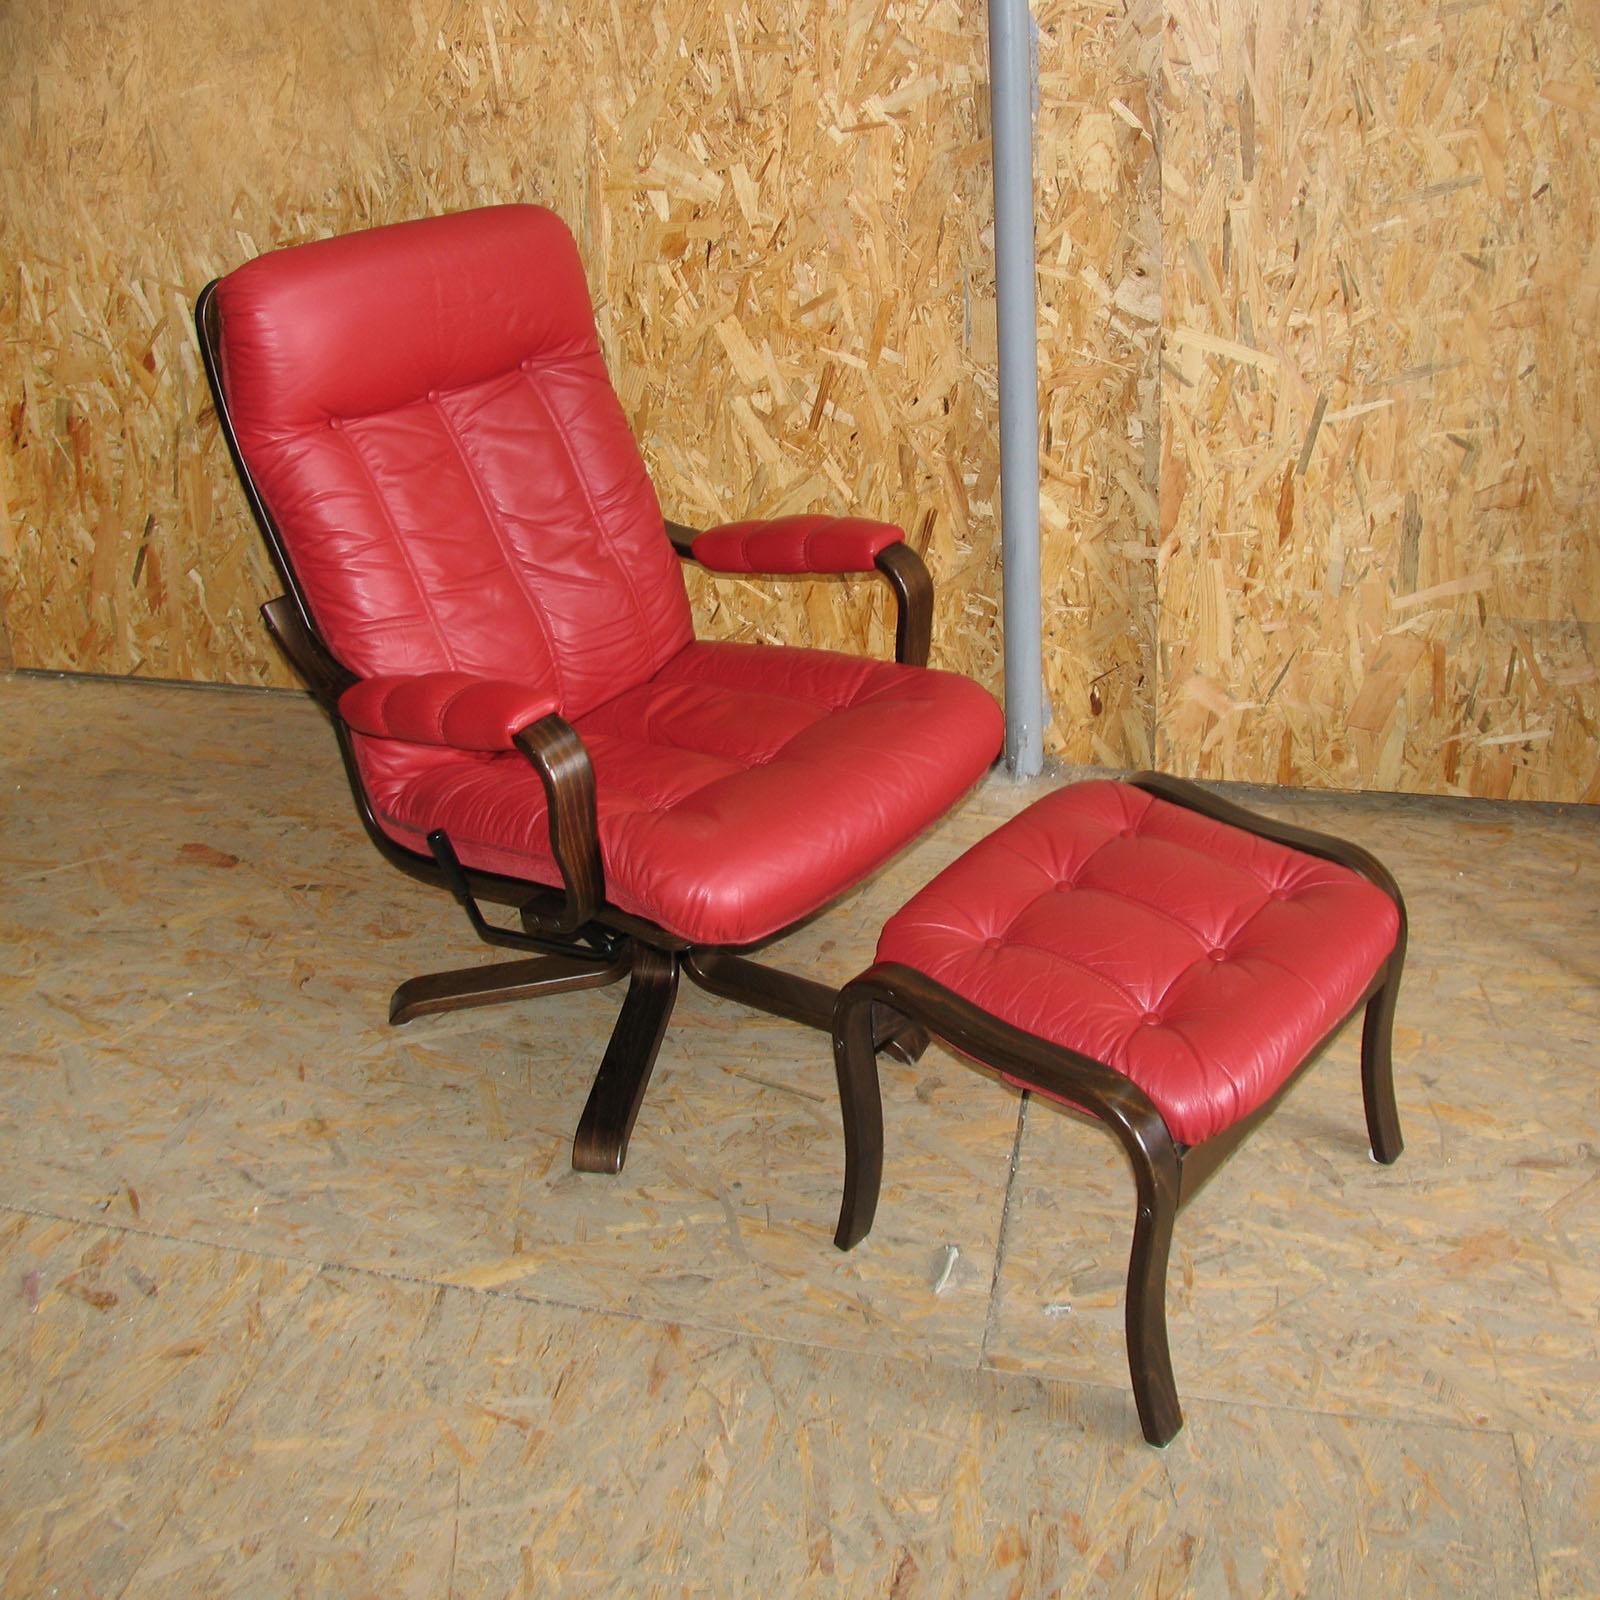 Mid-Century Modern Göte Möbel Swivel Armchair with Footrest, Sweden, 1970s, 2 Sets Available For Sale